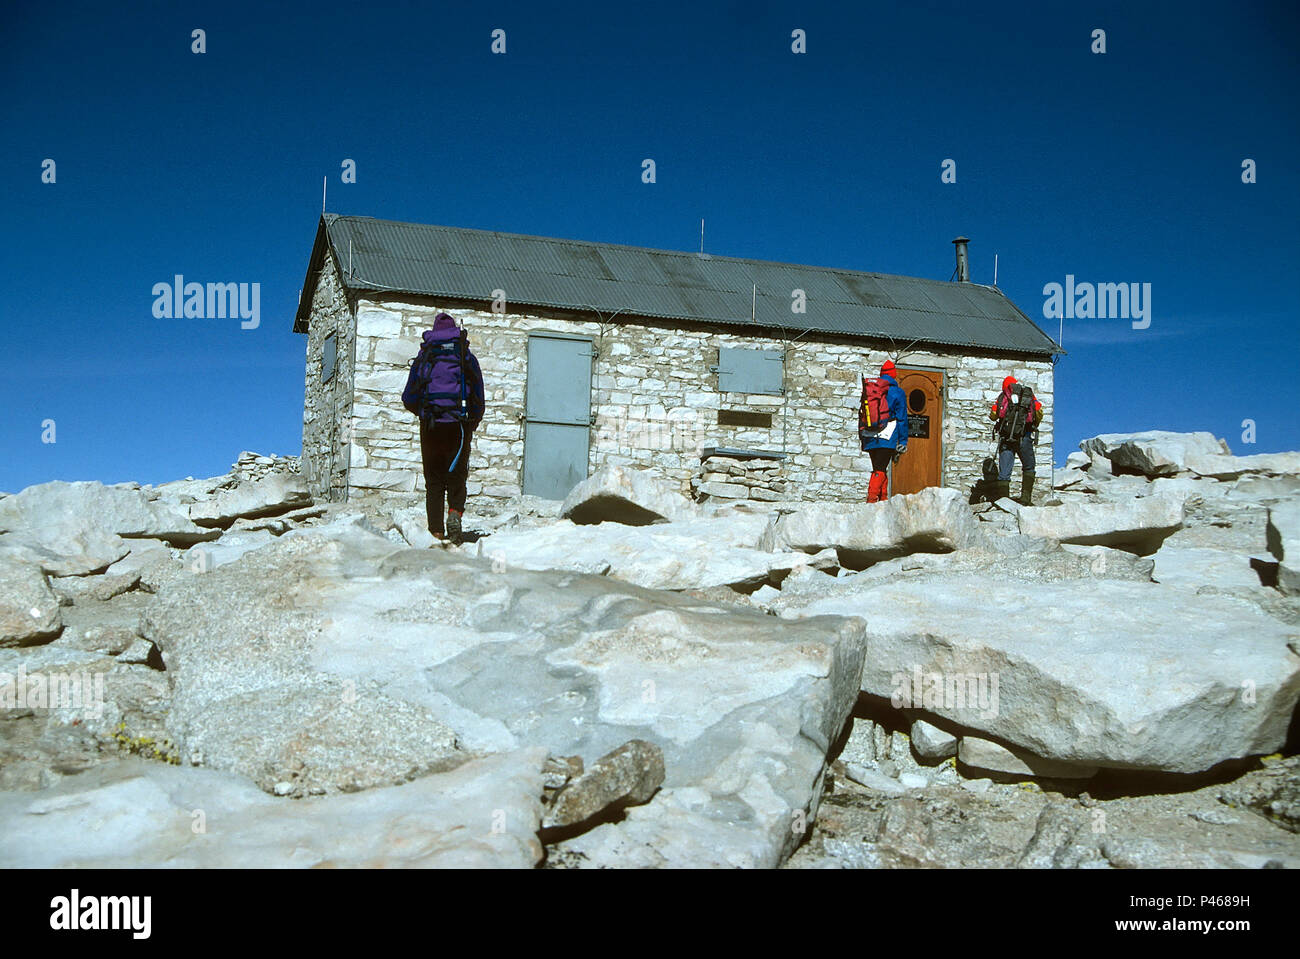 Hikers approach the storm shelter on the summit of Mount Whitney in the Sierra Nevada, California Stock Photo